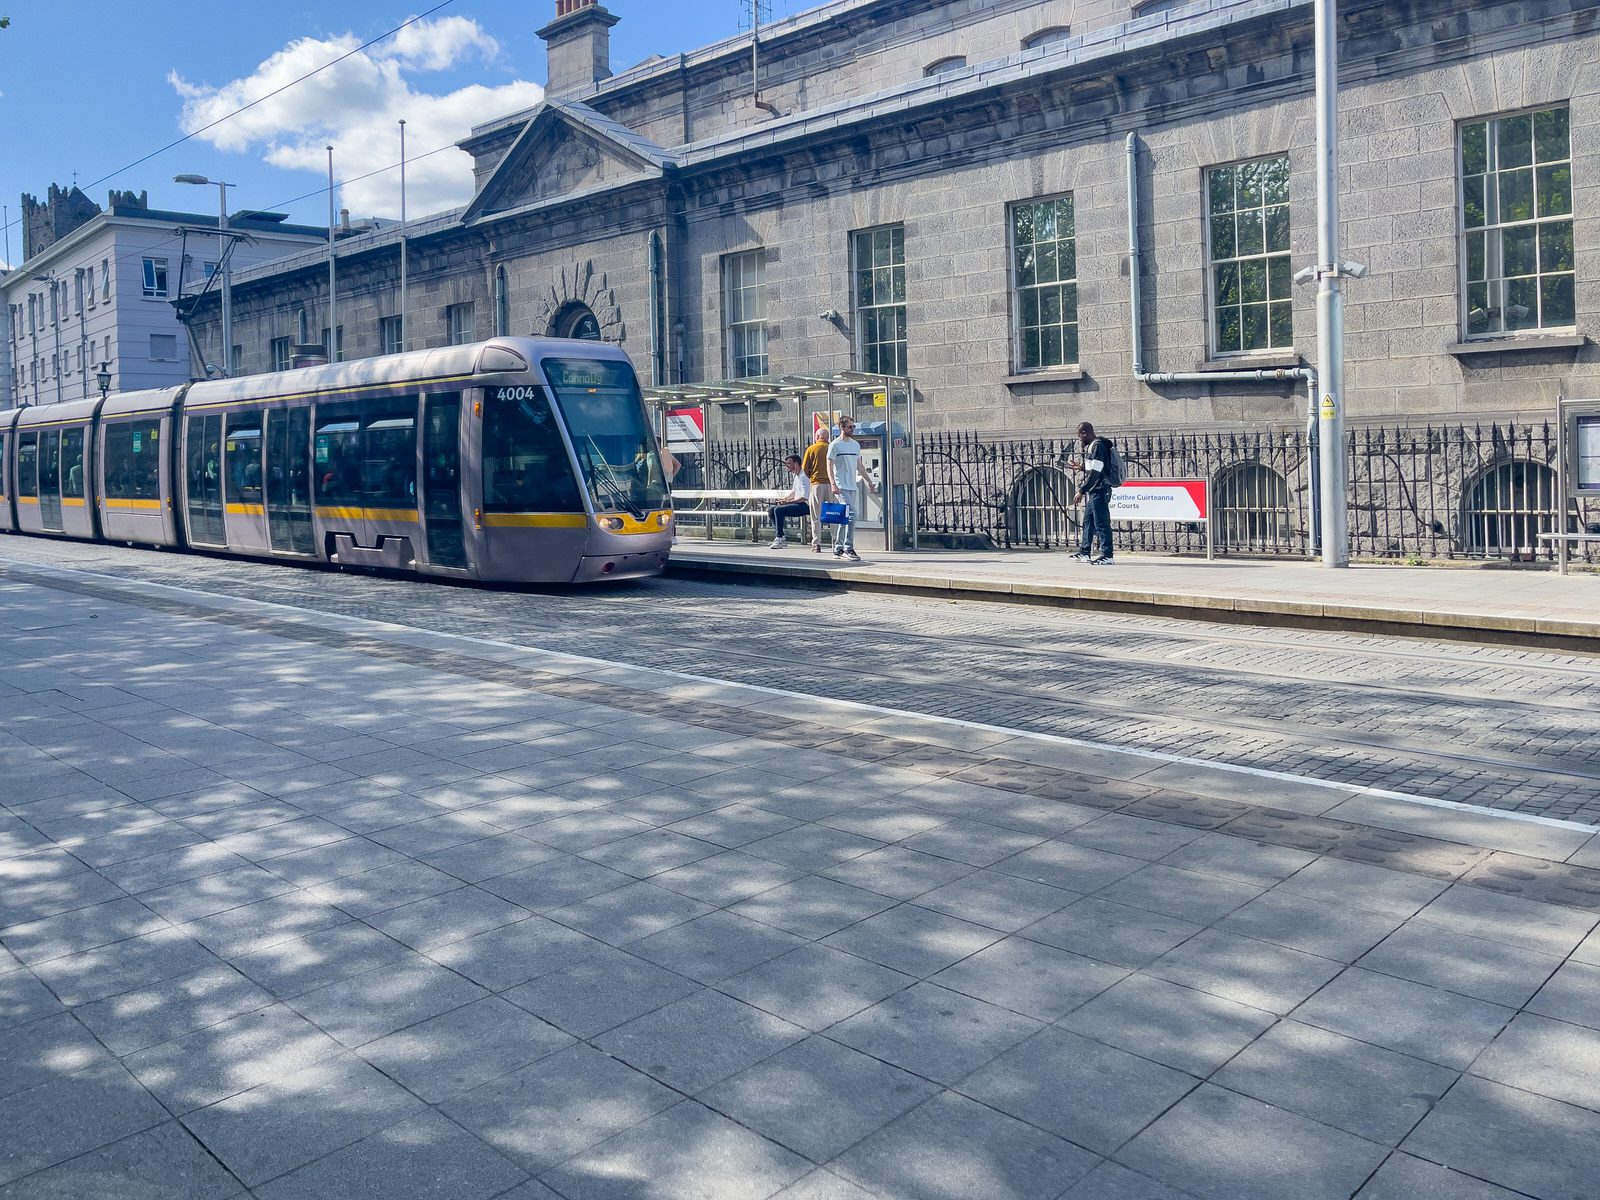 THE LUAS FOUR COURTS TRAM STOP [THERE IS MUCH TO BE SEEN HERE]-234102-1